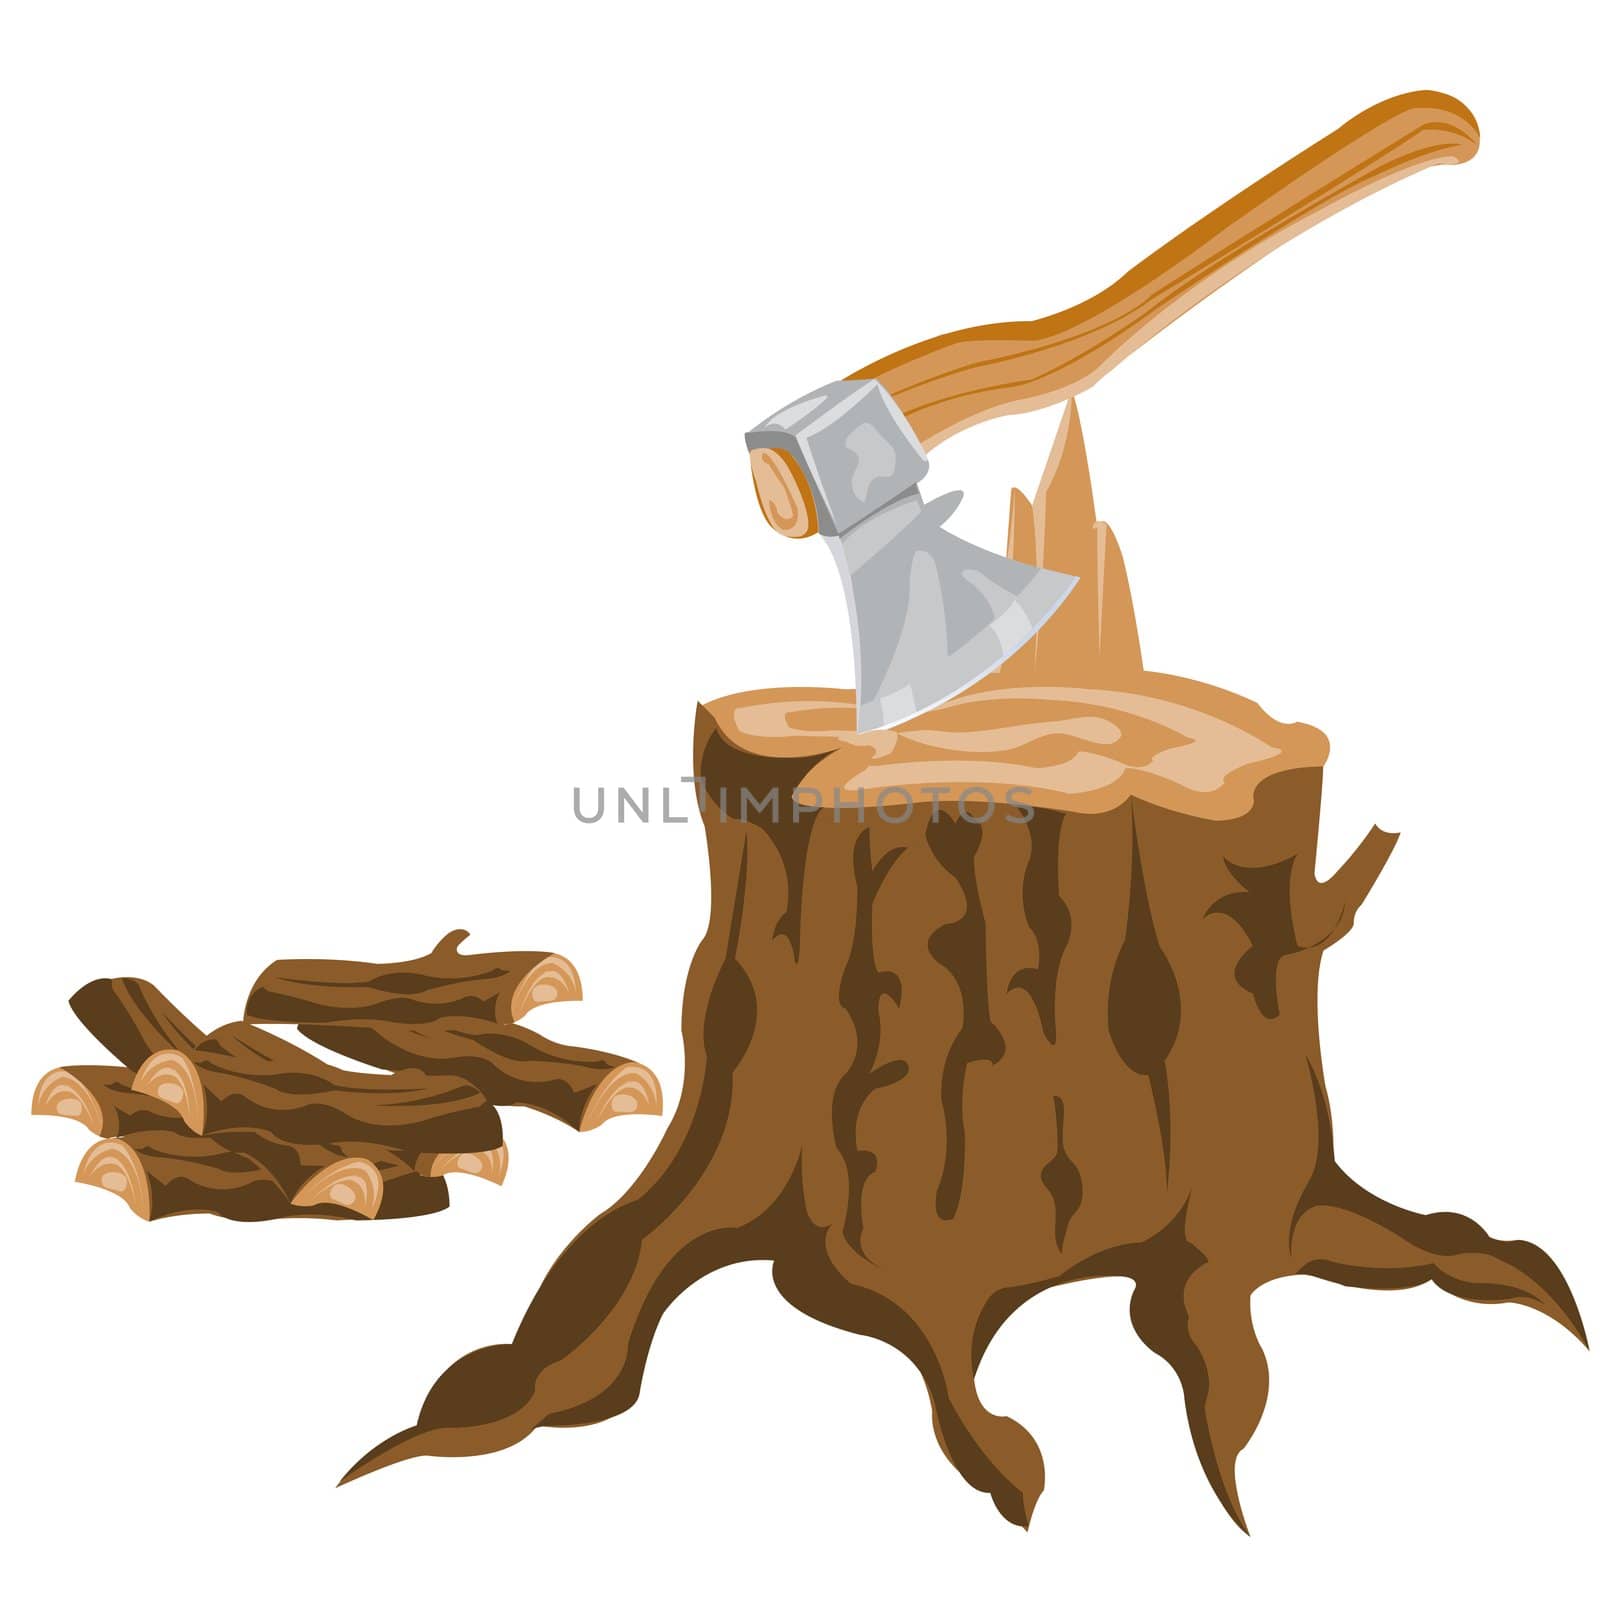 Axe and pricked firewood on white background